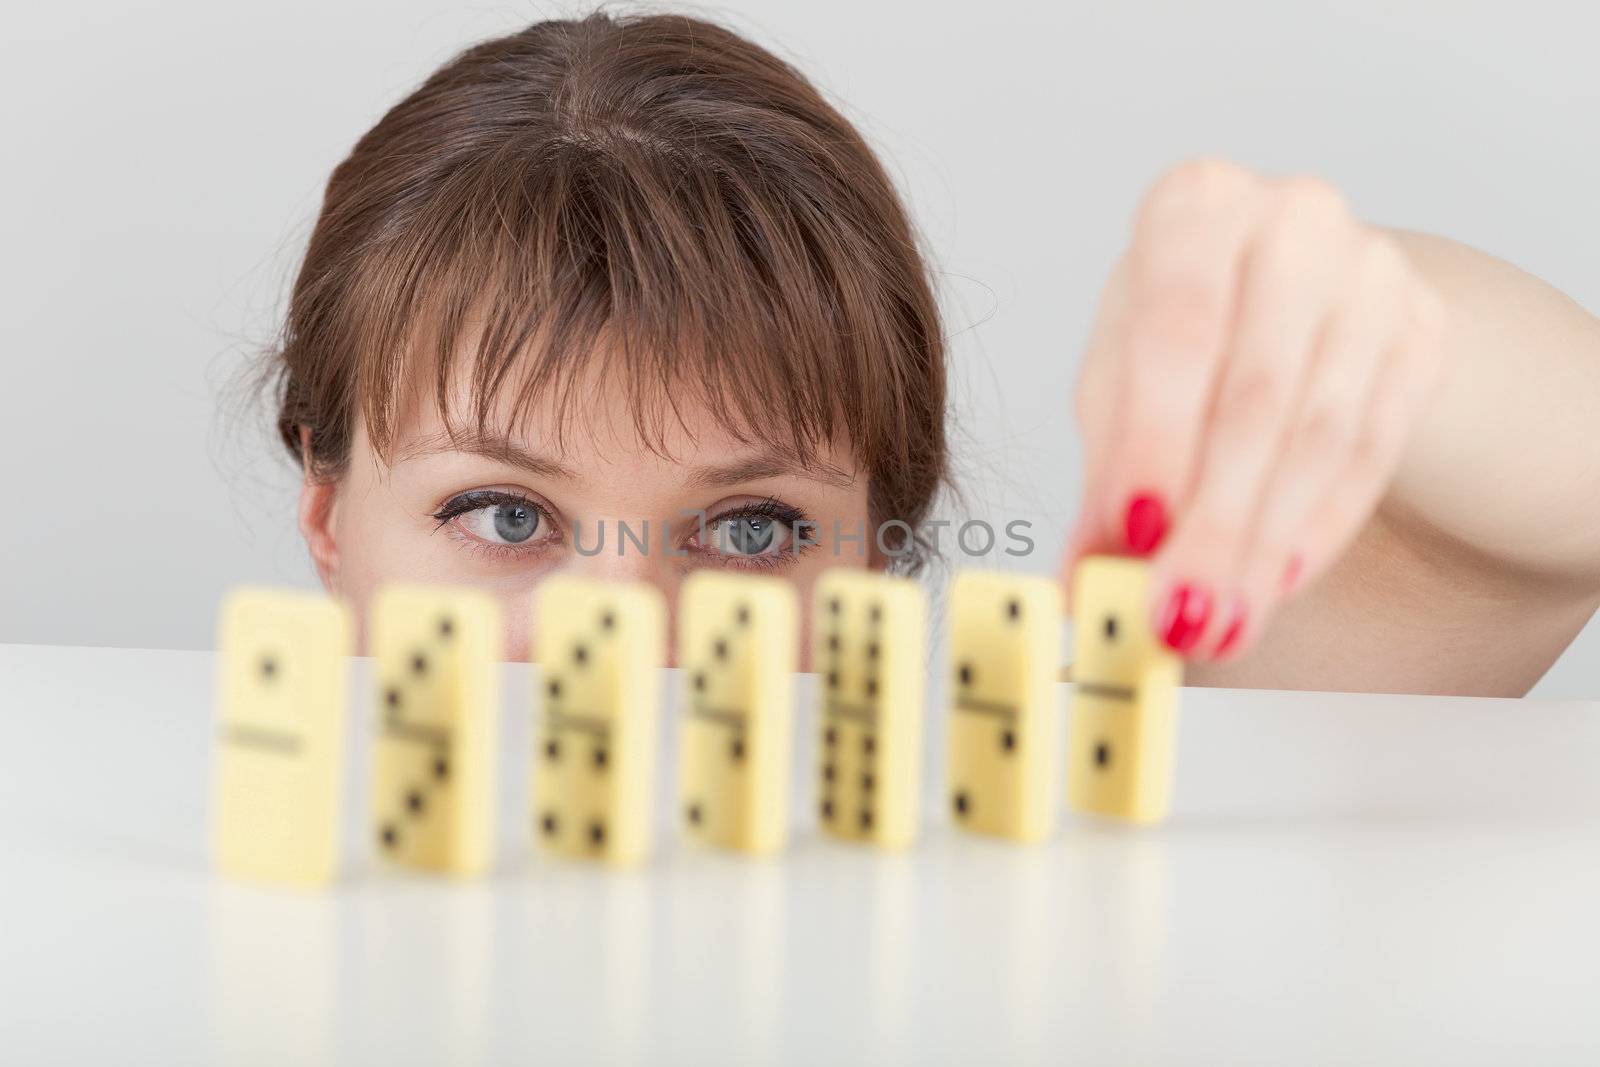 The girl builds a line of dominoes counters close up